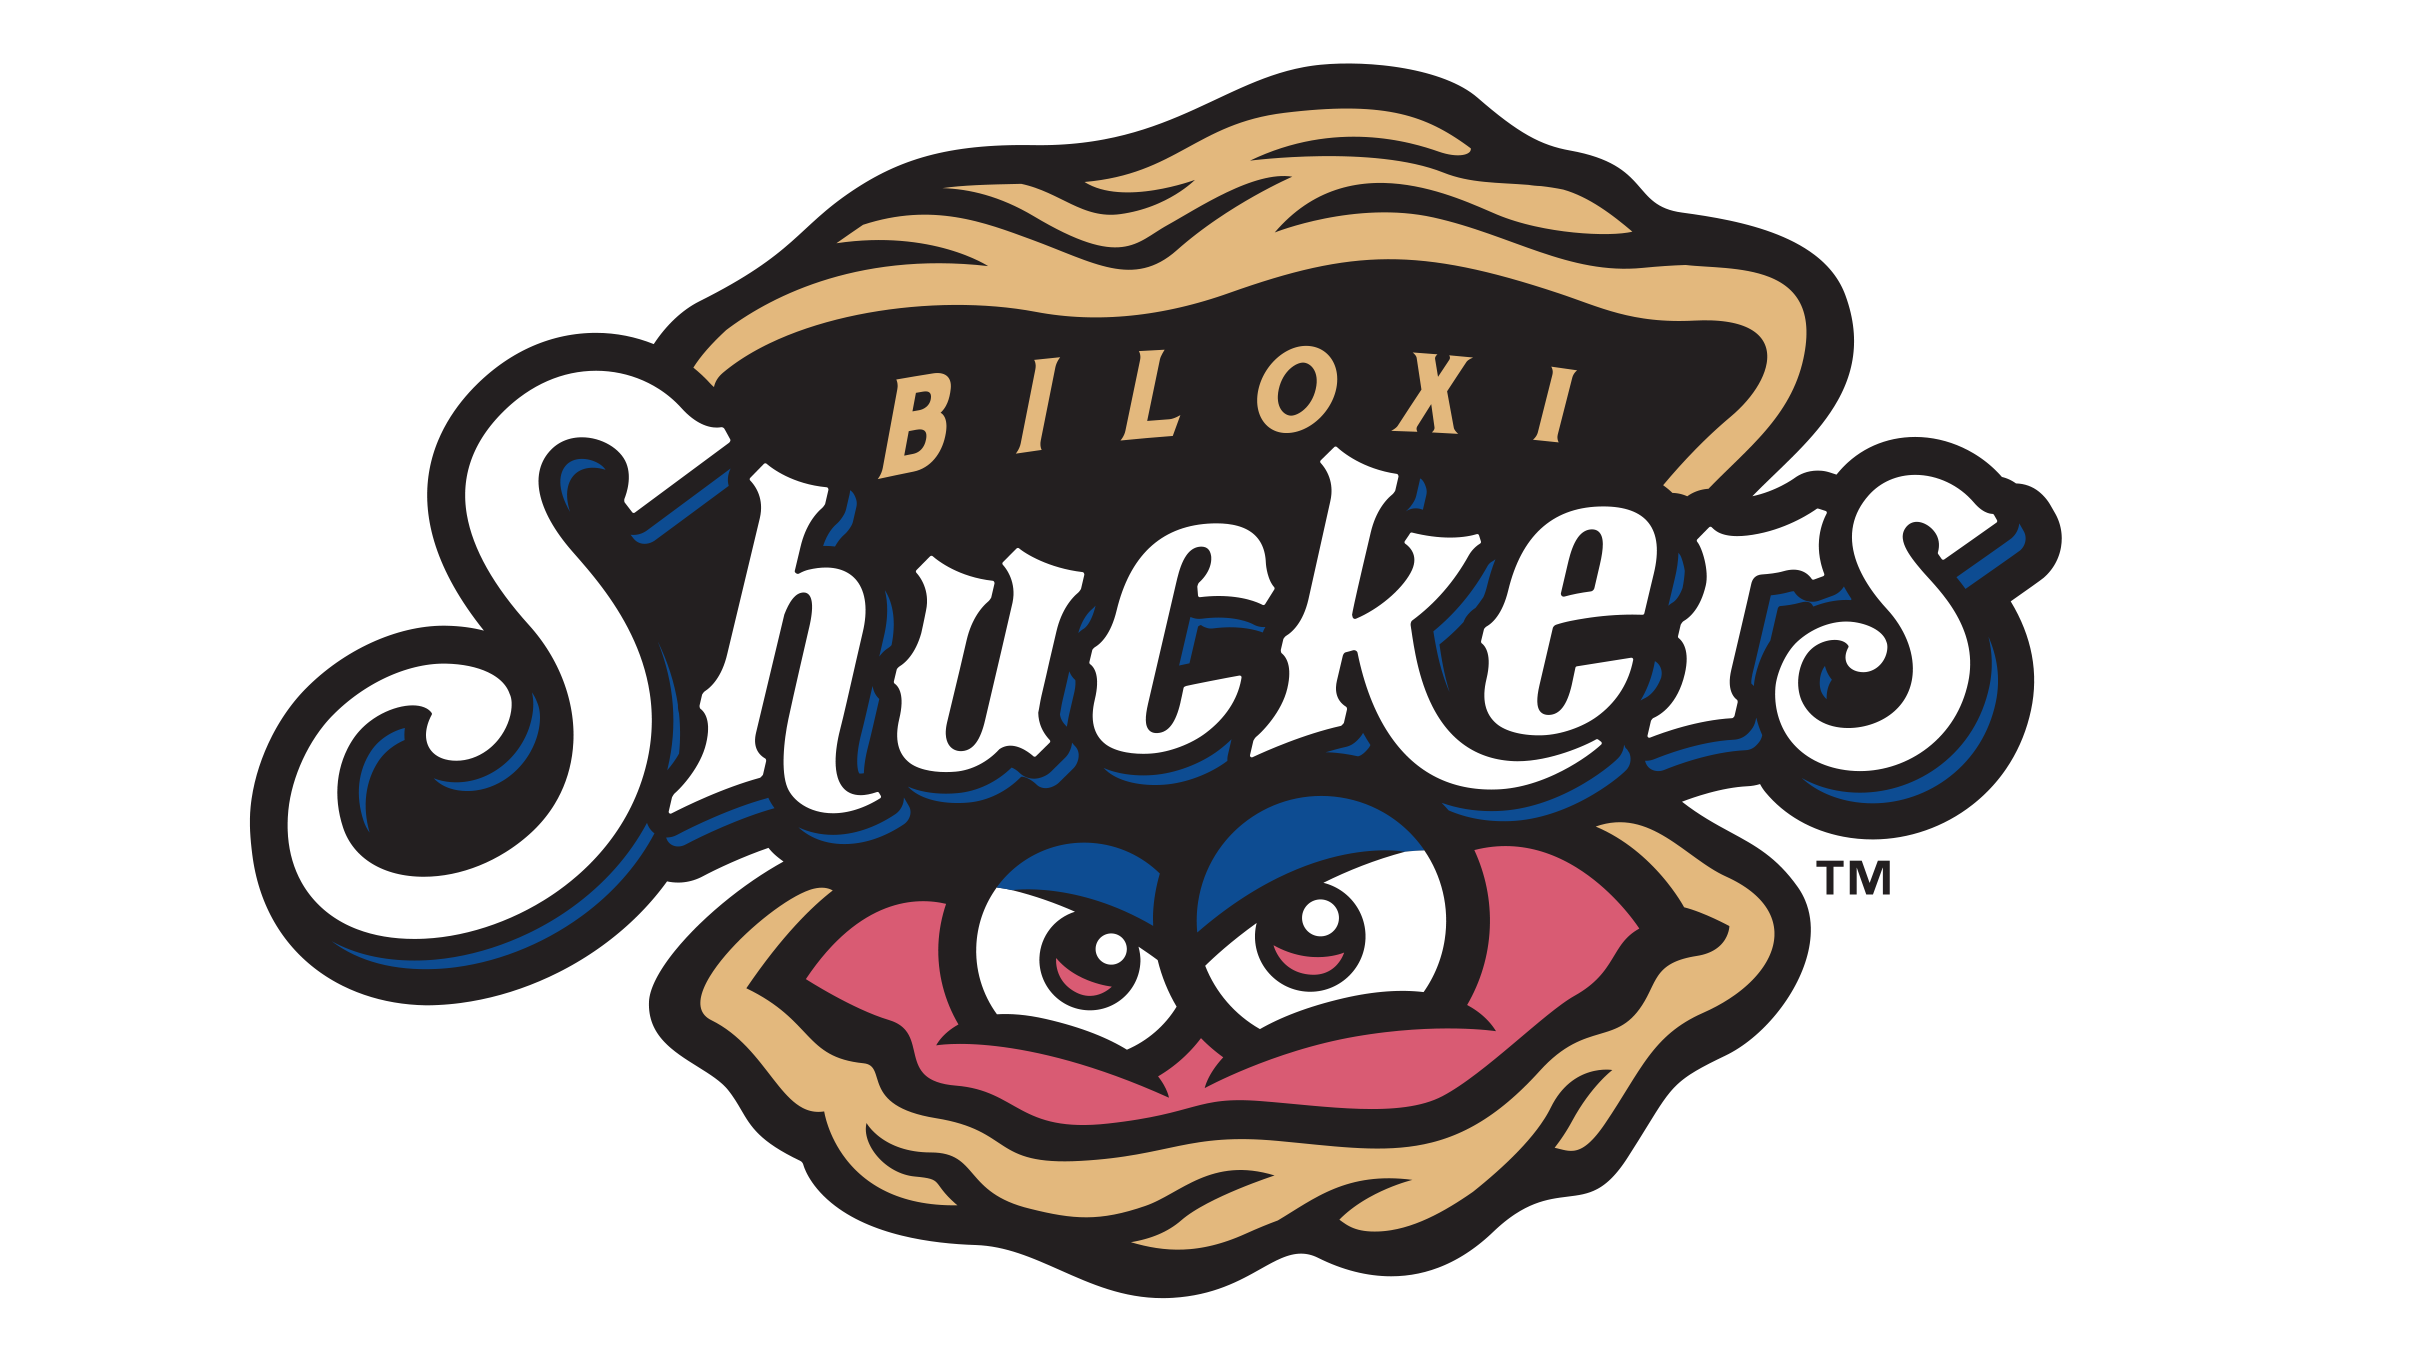 Biloxi Shuckers vs. Montgomery Biscuits in Biloxi promo photo for Thirsty Thursday presale offer code